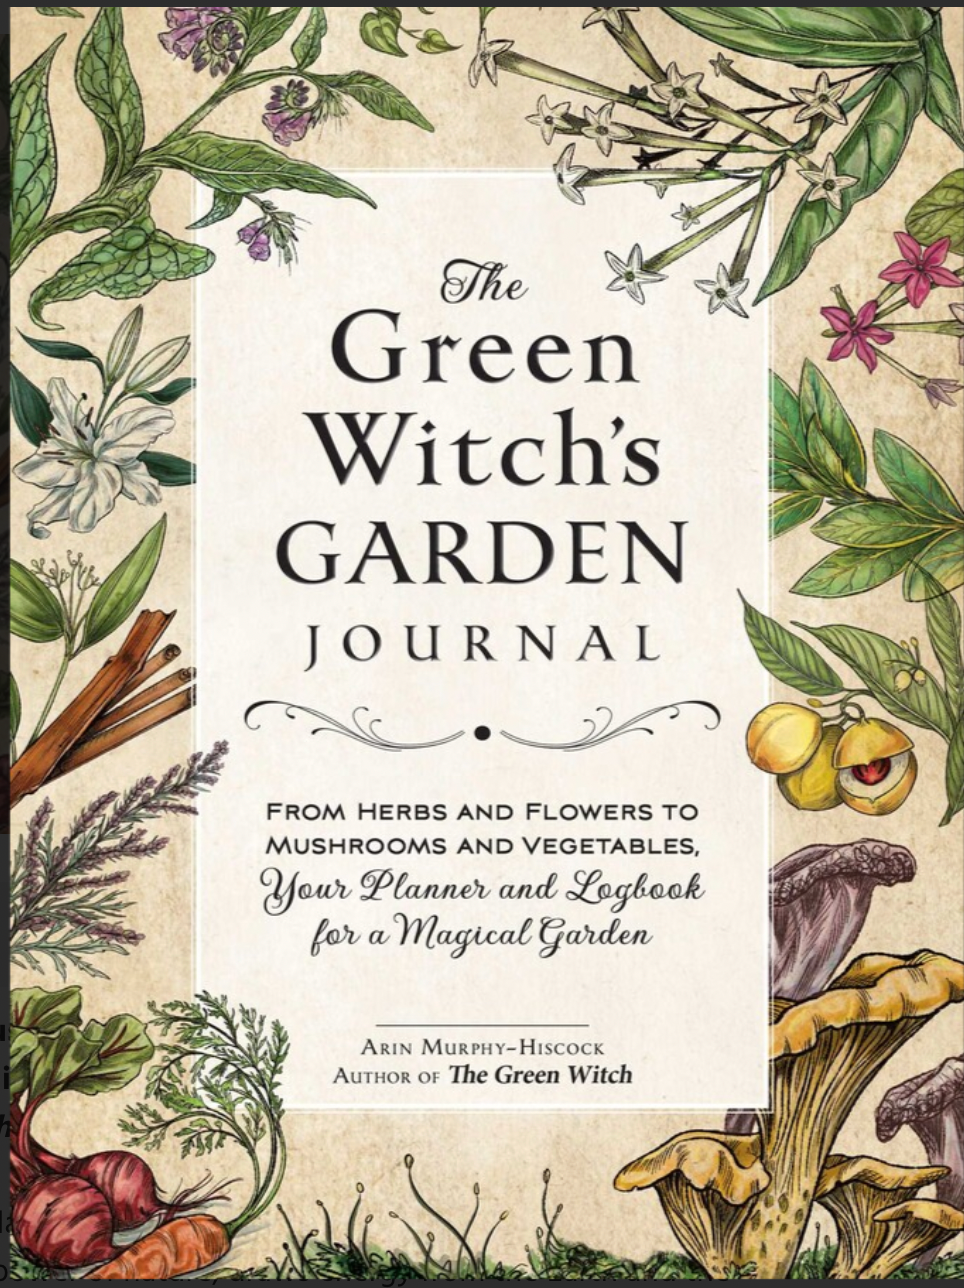 The Green Witches Garden Journal by Arin Murphy-Hiscock